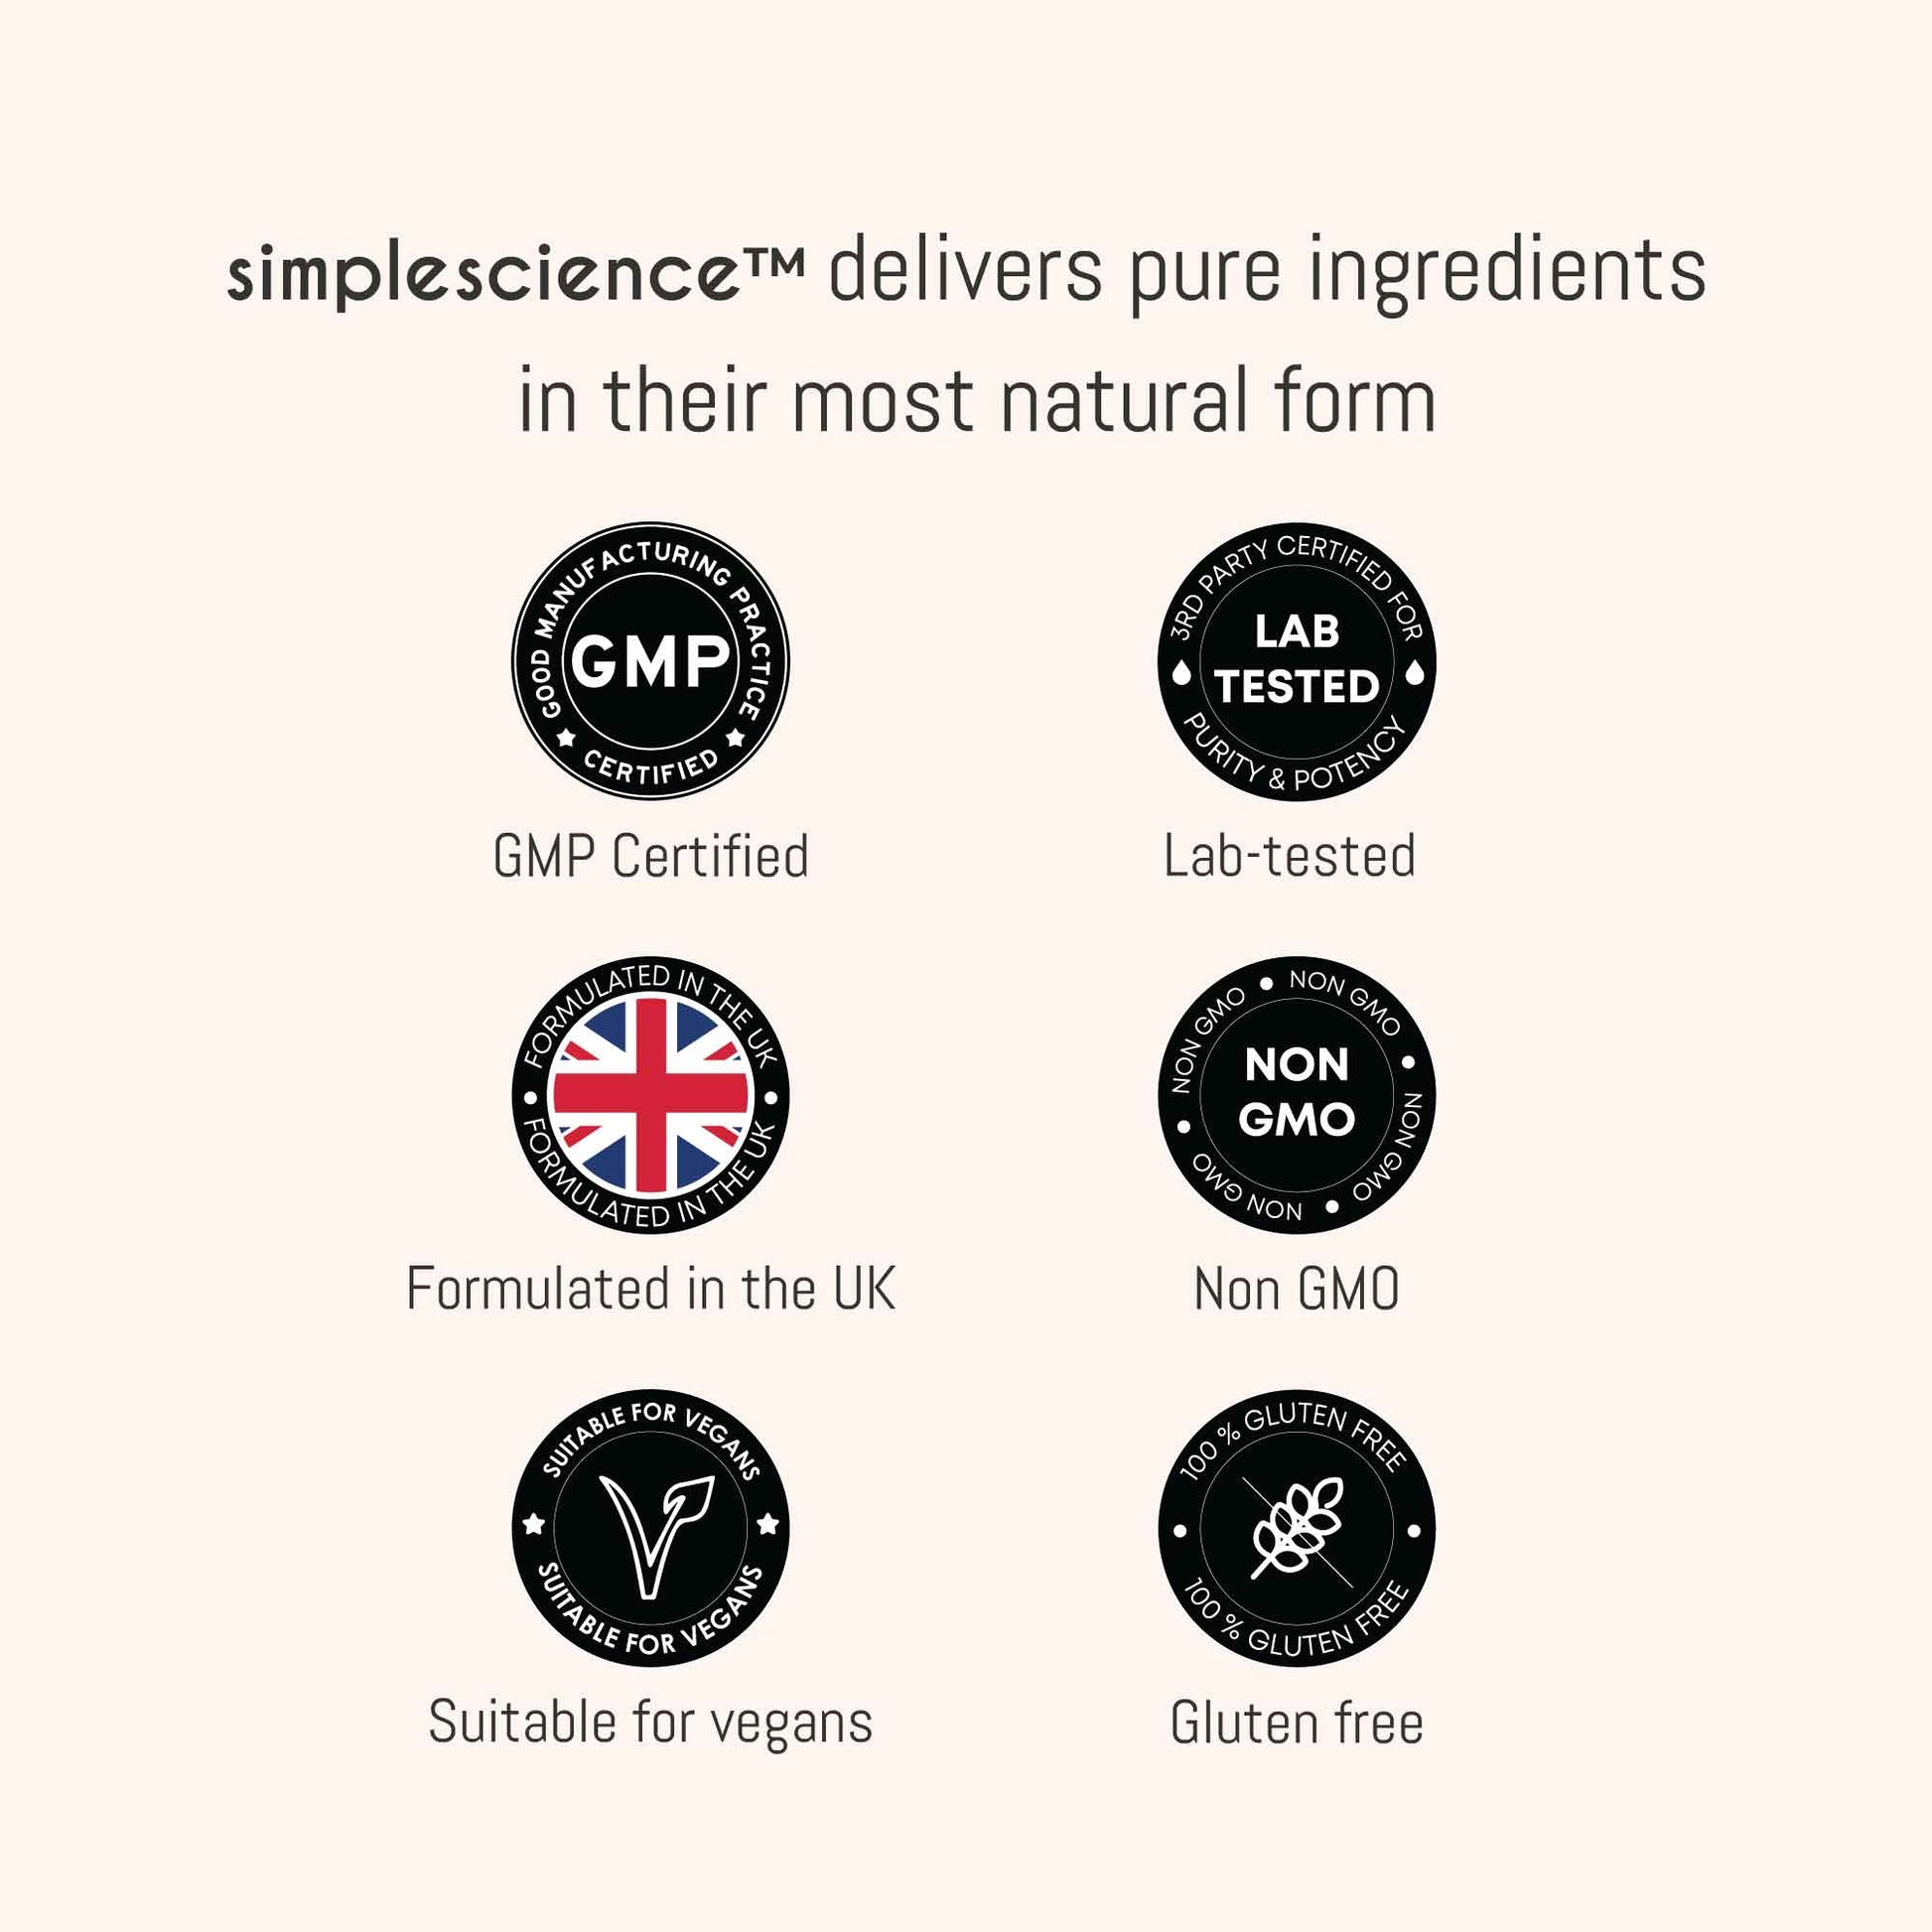 All simplescience products deliver ingredients in their natural form. Non-GMO, no preservatives or artificial colours, suitable for vegetarians and vegans. Dairy, soy, gluten, wheat and shellfish free.